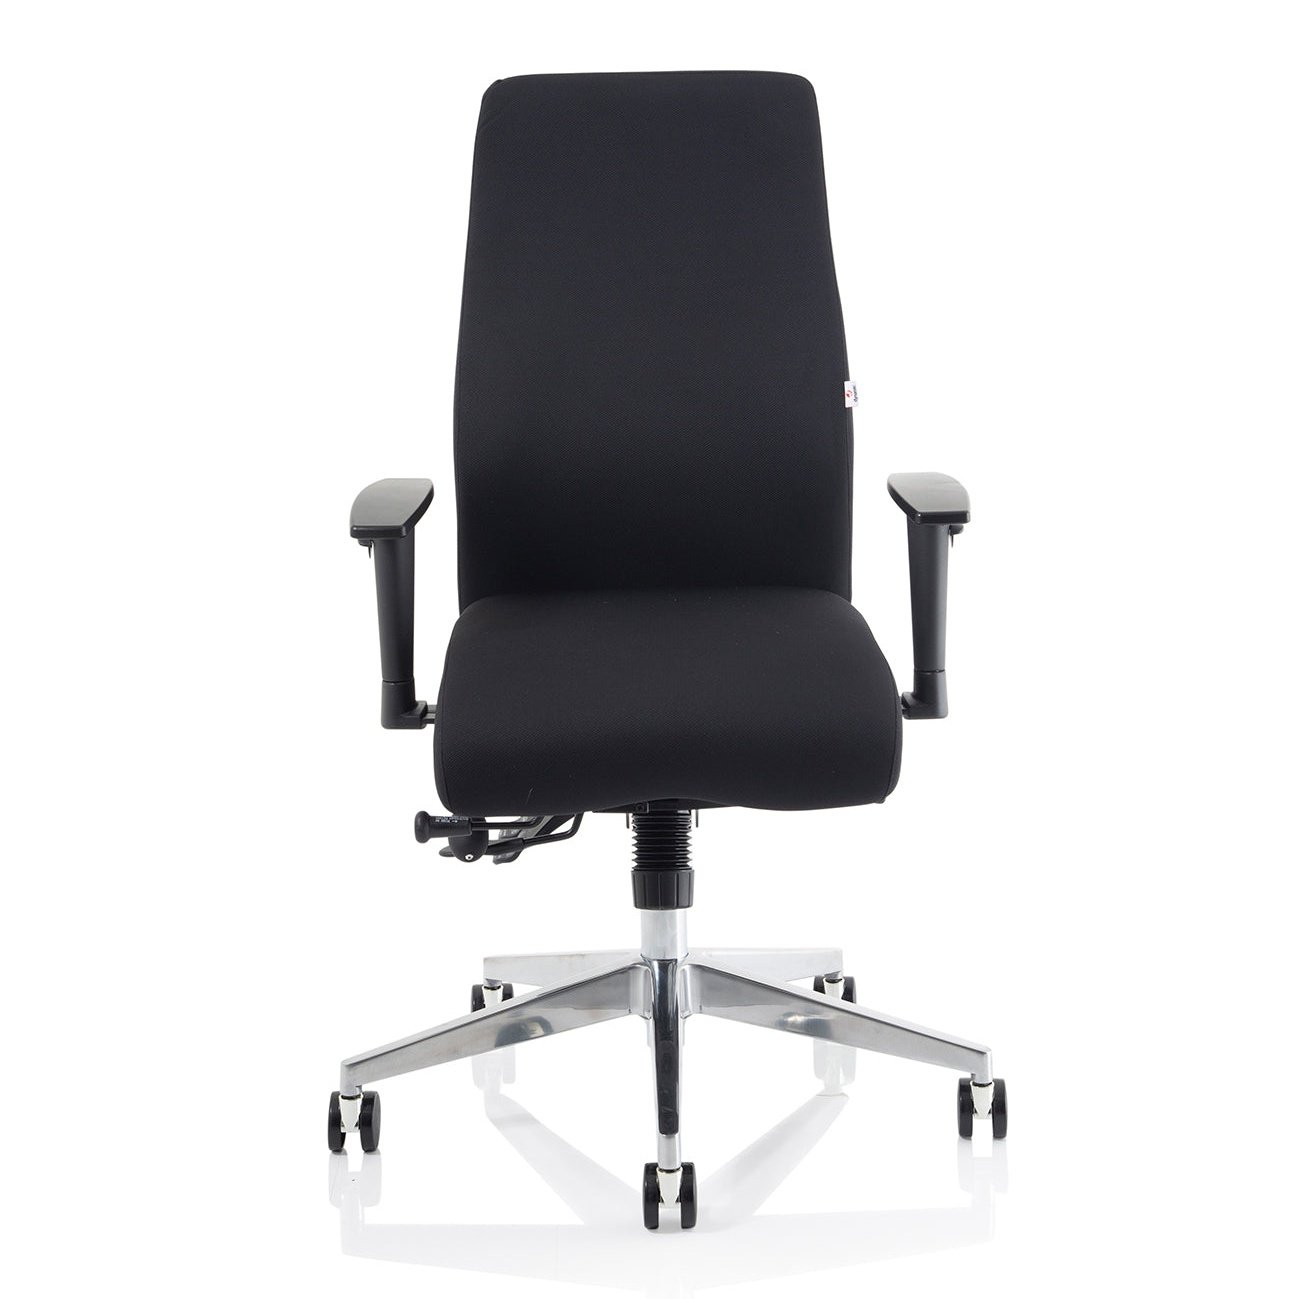 Onyx Ergonomic High Back Posture Chair - Height Adjustable Arms & Headrest, 24hr Use, 135kg Capacity, 5-Year Guarantee